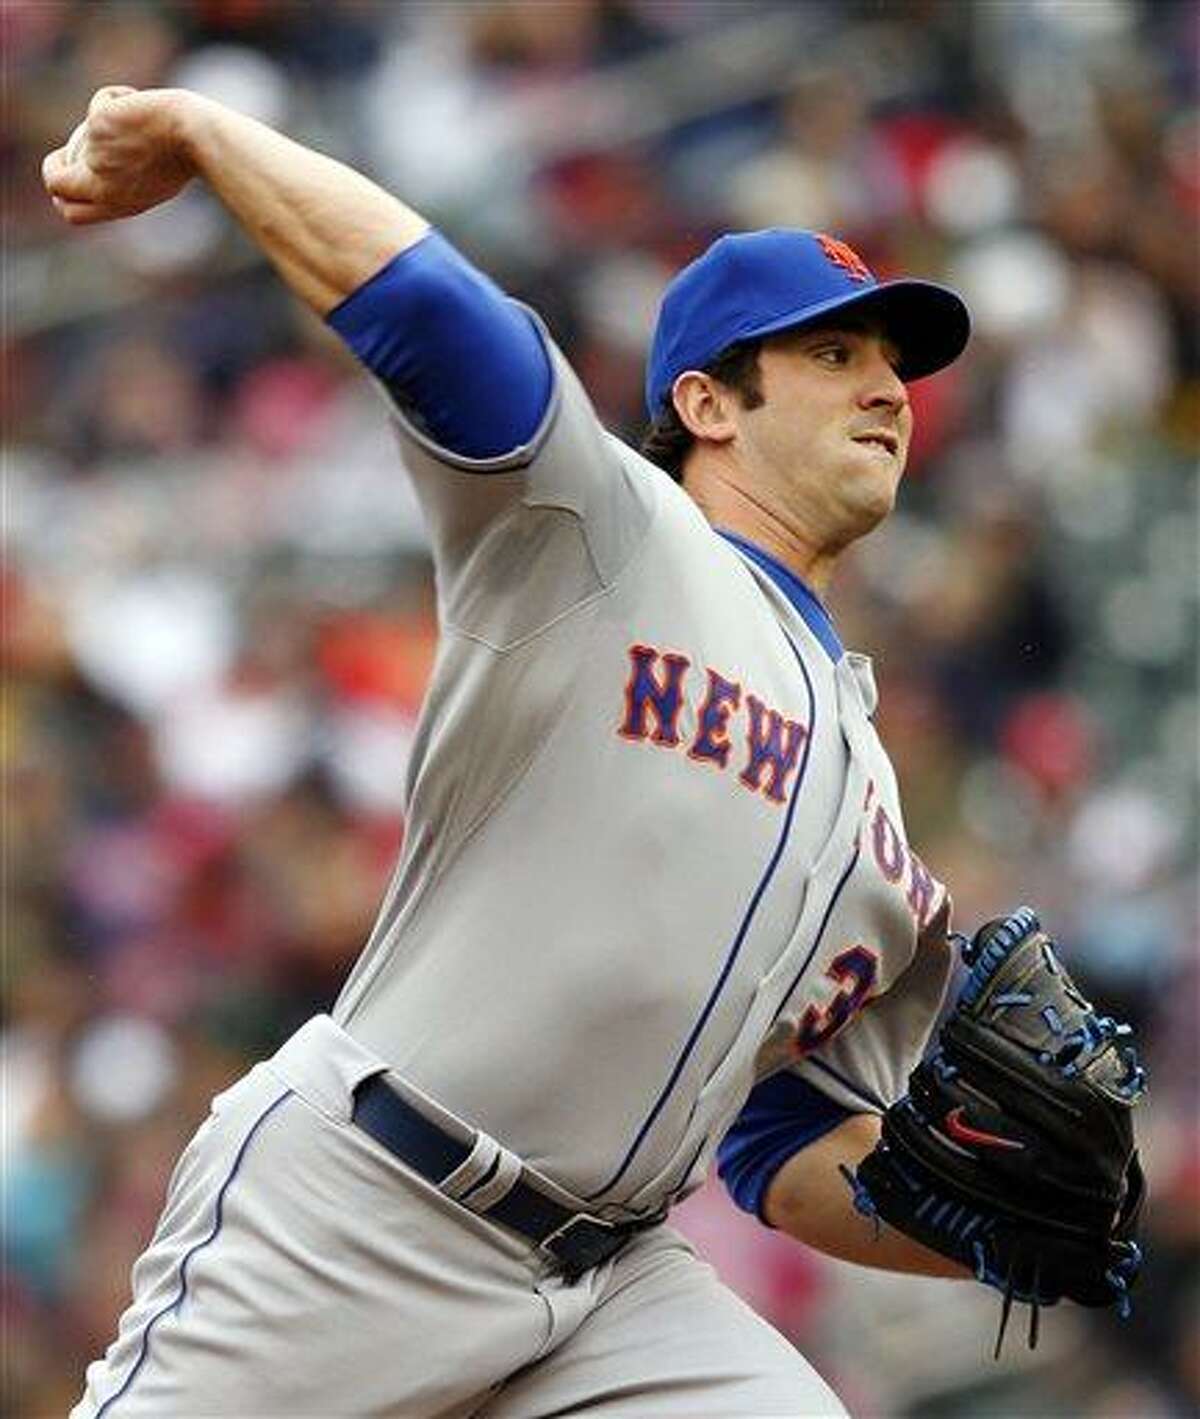 New York Mets starting pitcher Matt Harvey throws against the Minnesota Twins during the first inning of a baseball game Saturday, April 13, 2013, in Minneapolis. Harvey had the win and the Mets defeated the Twins 4-2. (AP Photo/Genevieve Ross)